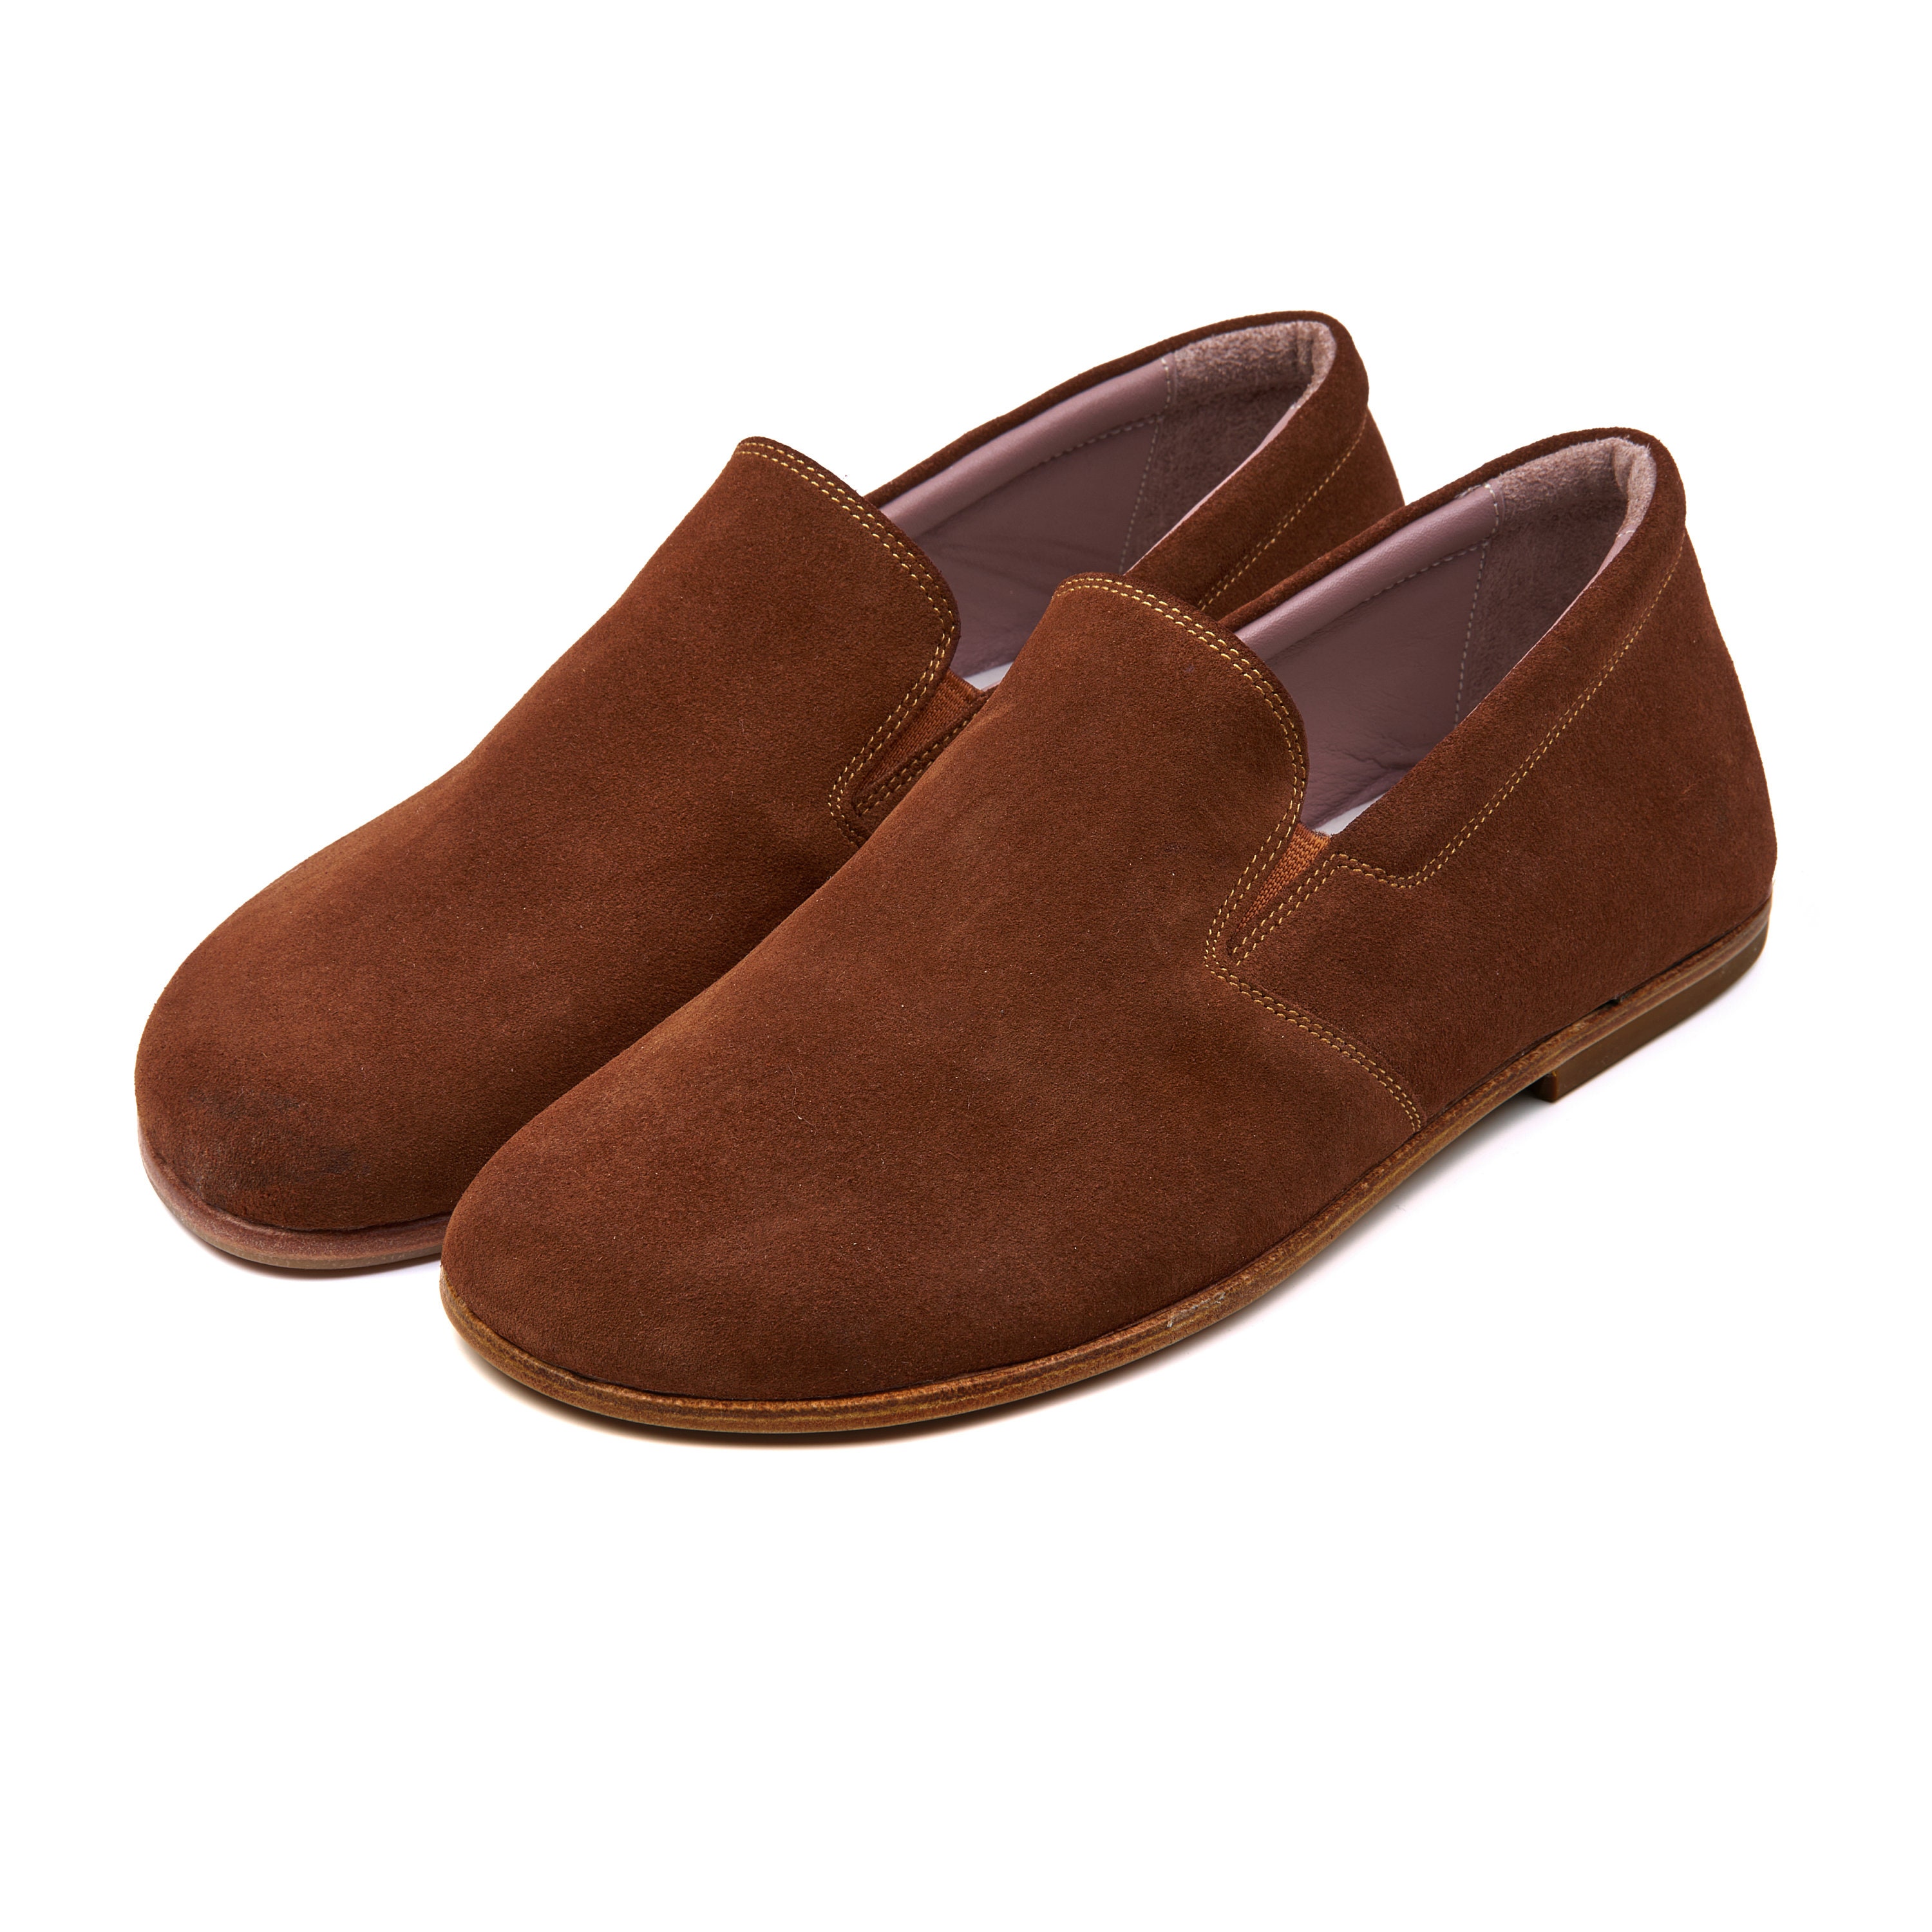 Lilium men's loafer in glossy brown leather with leather sole